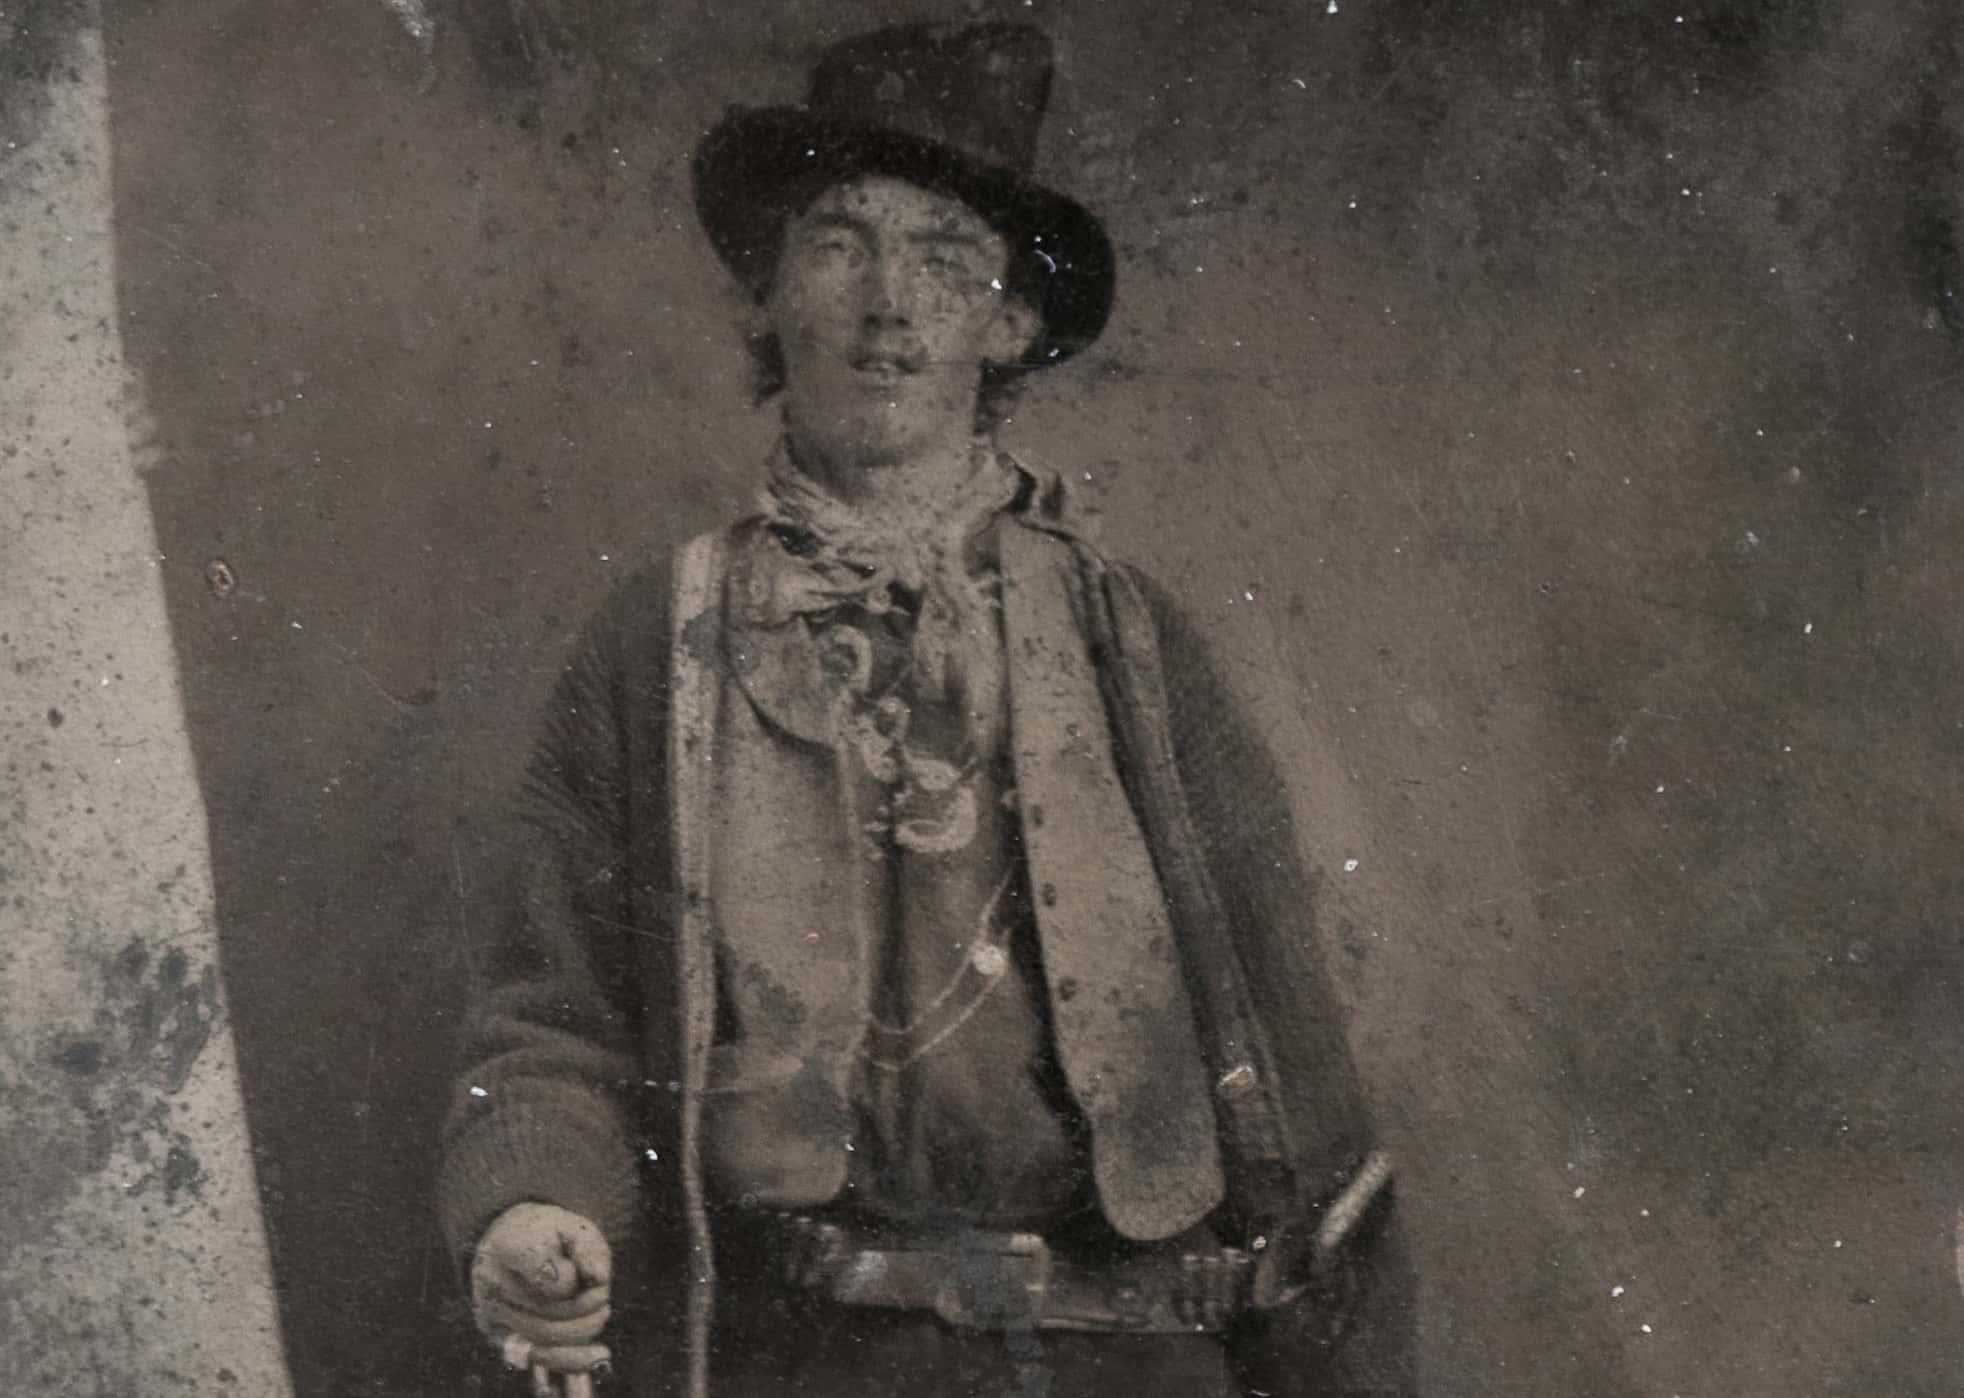 Billy the Kid facts